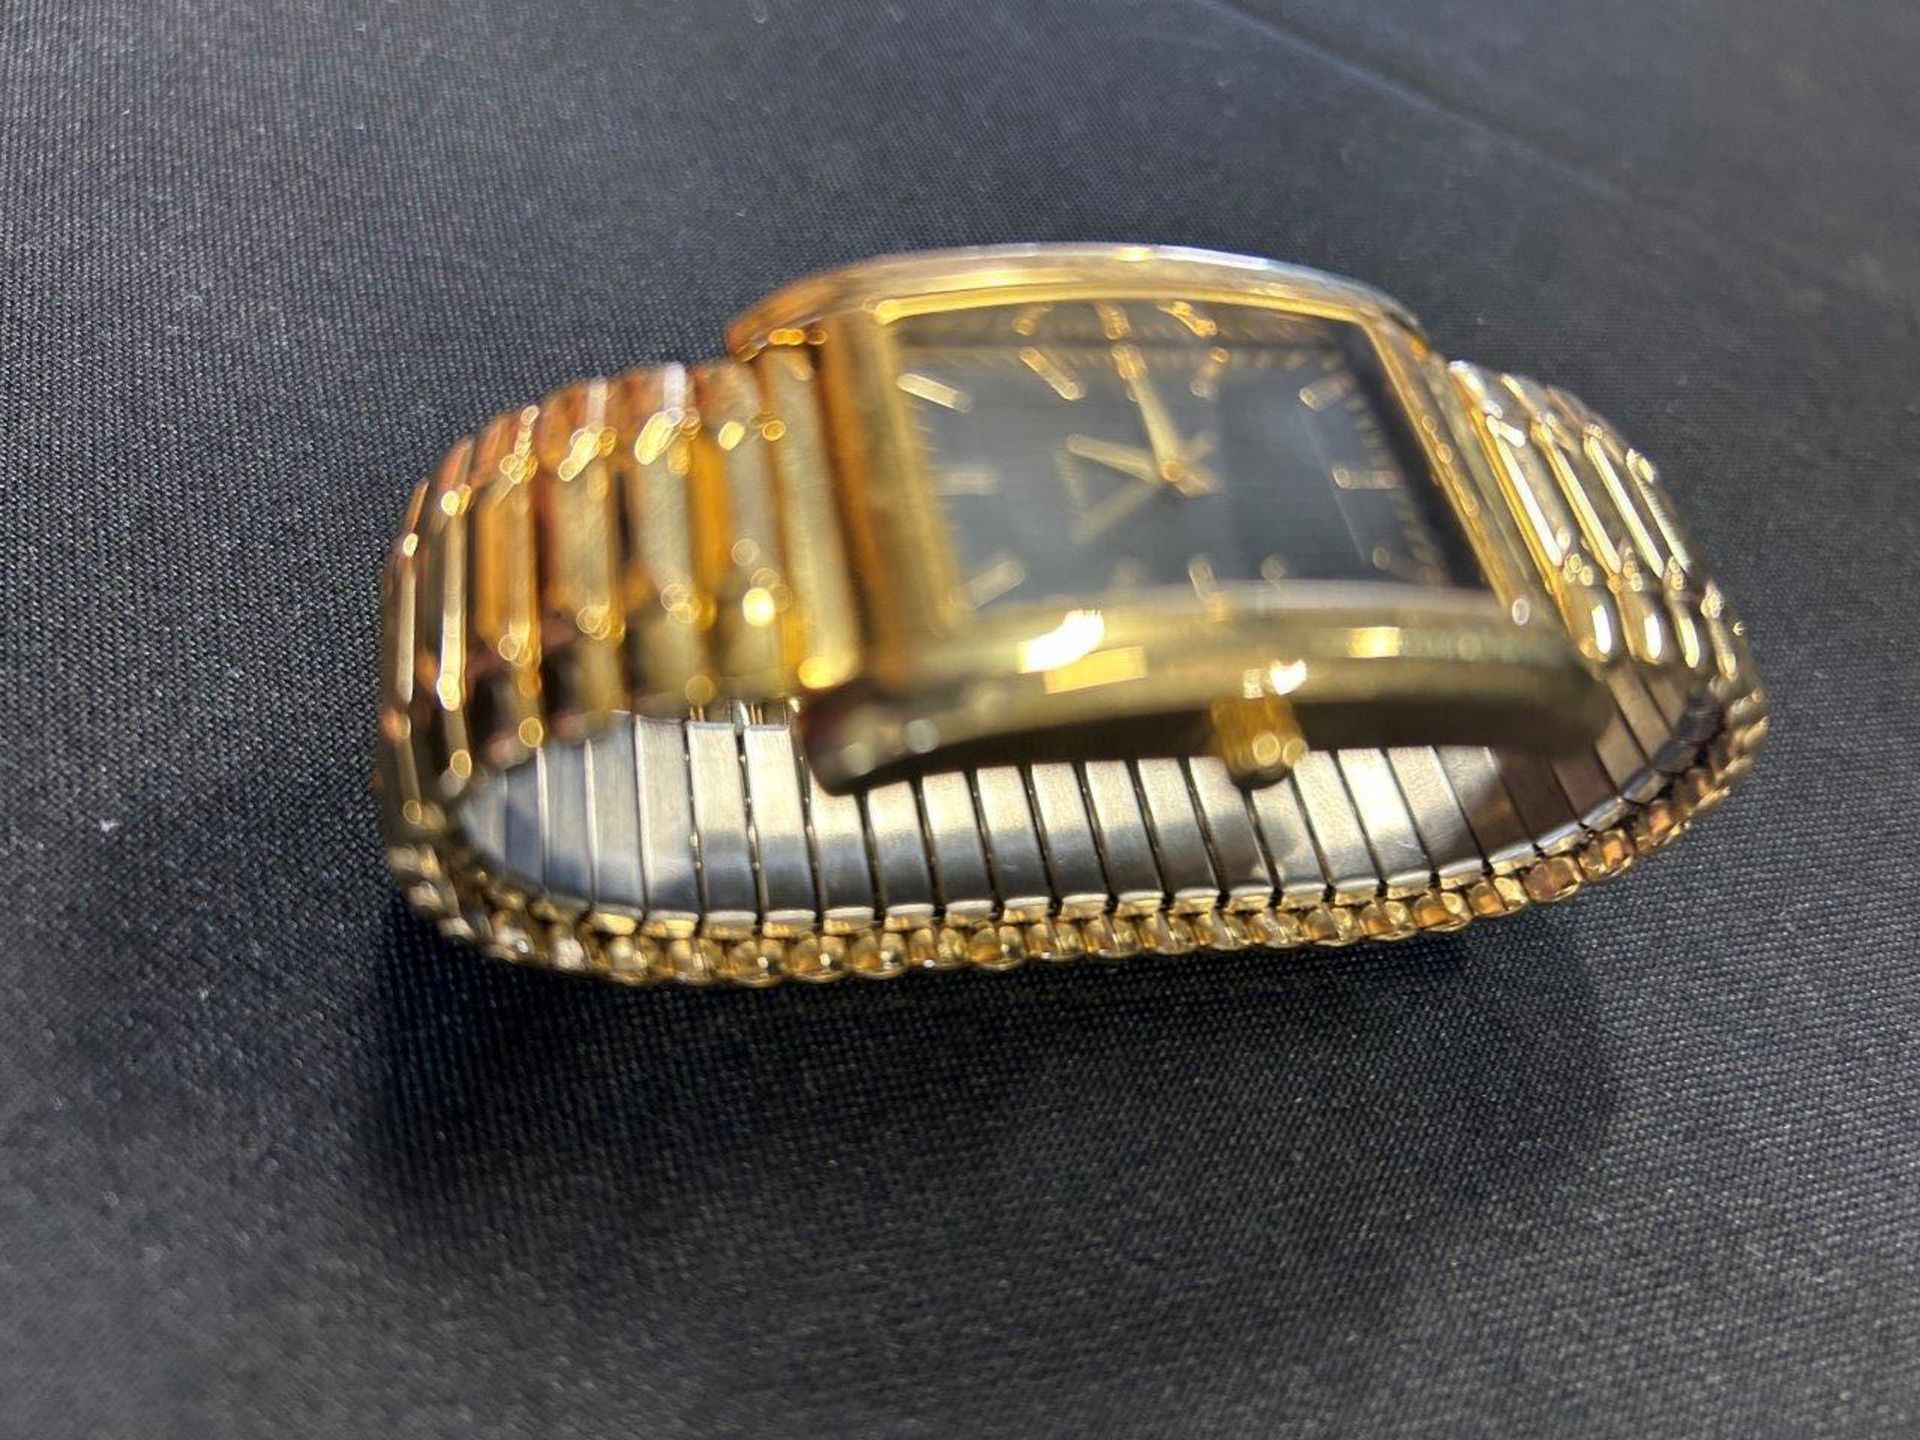 4-WRIST WATCHES - Image 11 of 15